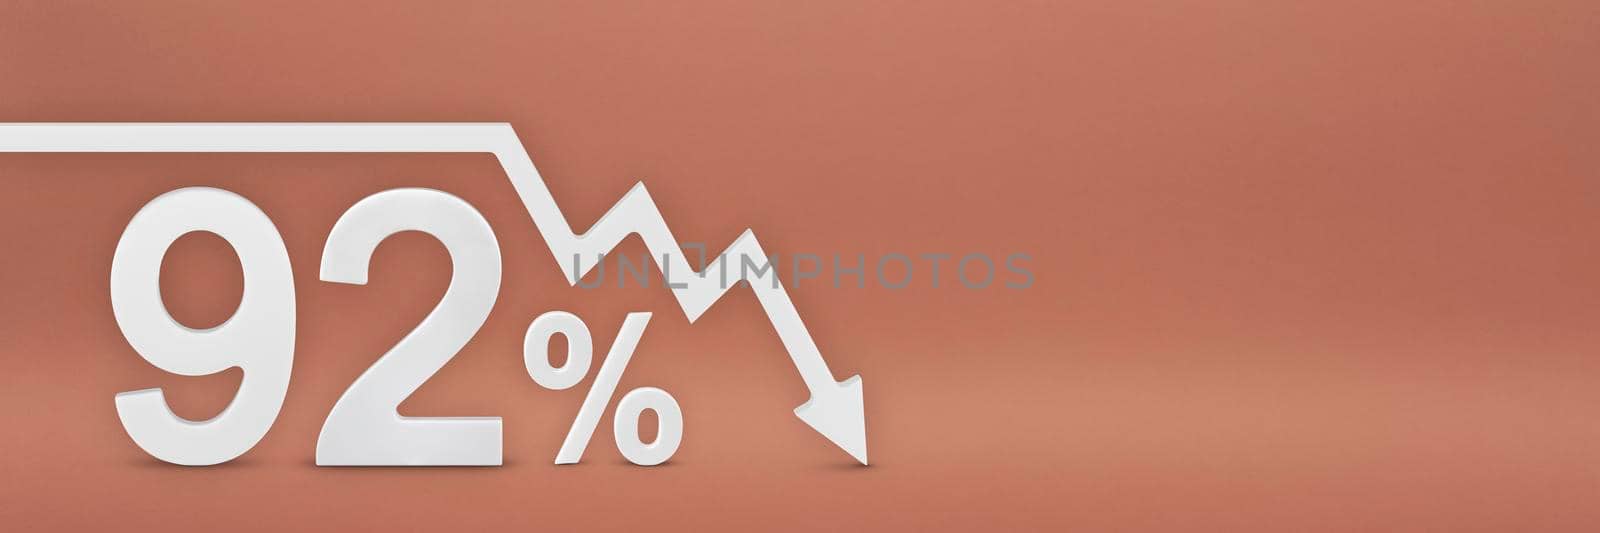 ninety-two percent, the arrow on the graph is pointing down. Stock market crash, bear market, inflation.Economic collapse, collapse of stocks.3d banner,92 percent discount sign on a red background. by SERSOL